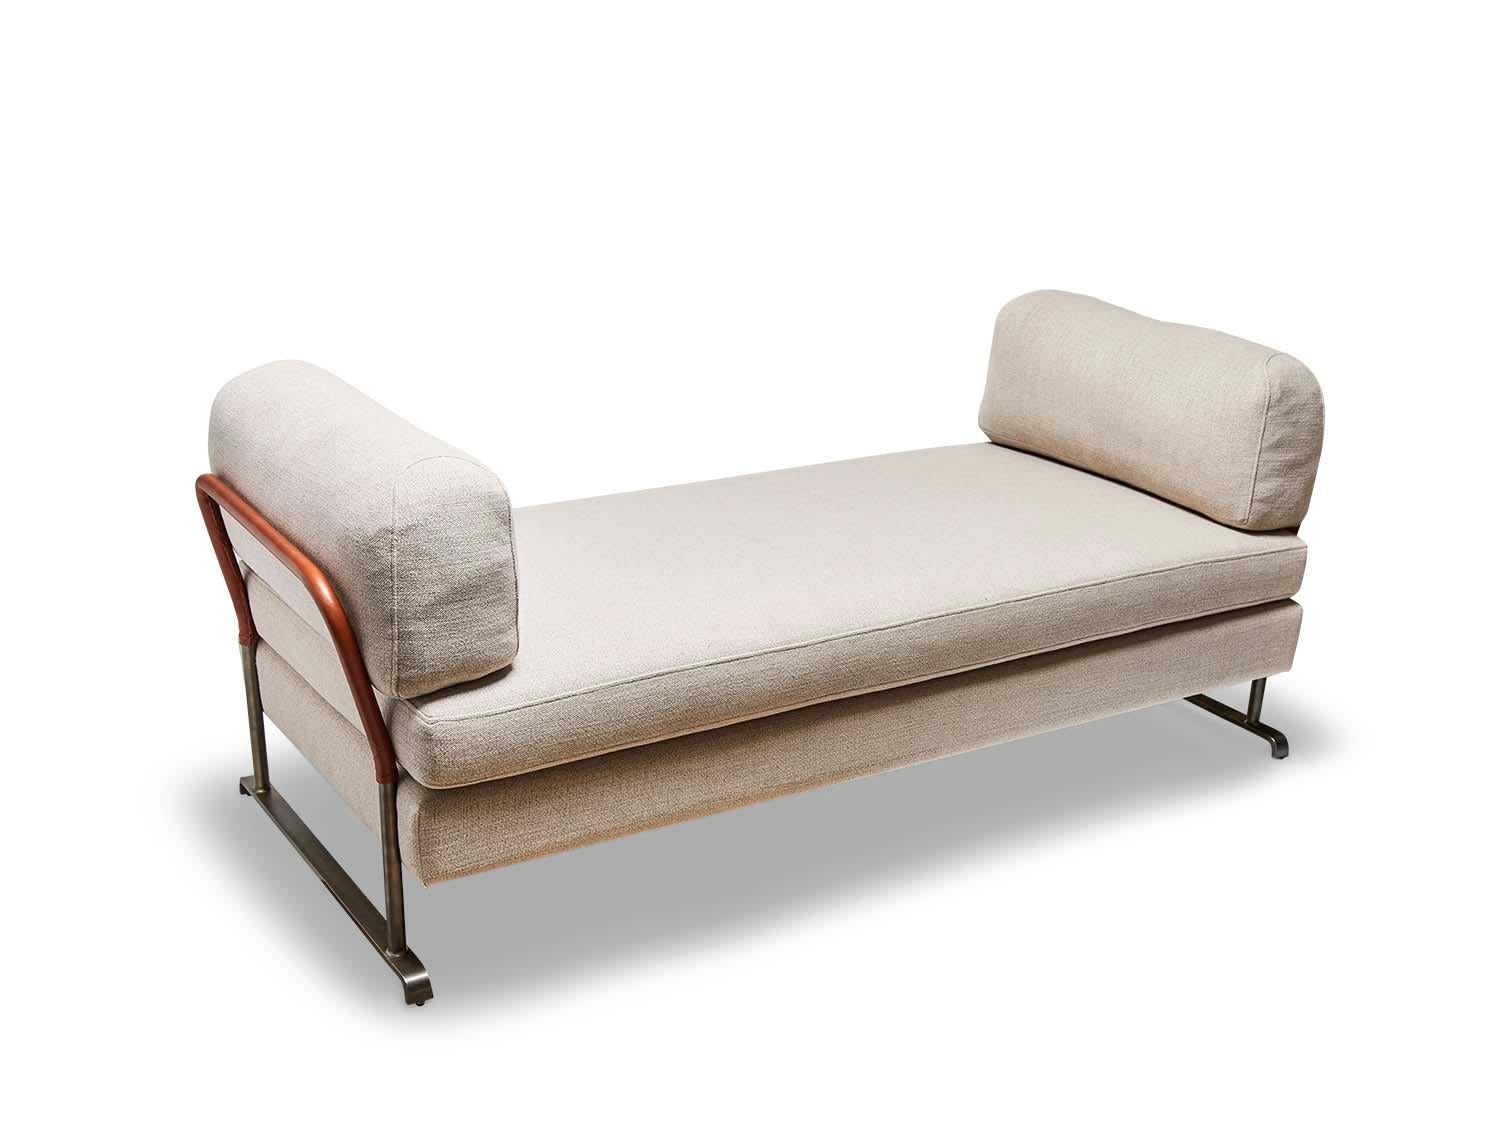 American Grey Linen and Leather Maker's Daybed by Lawson-Fenning